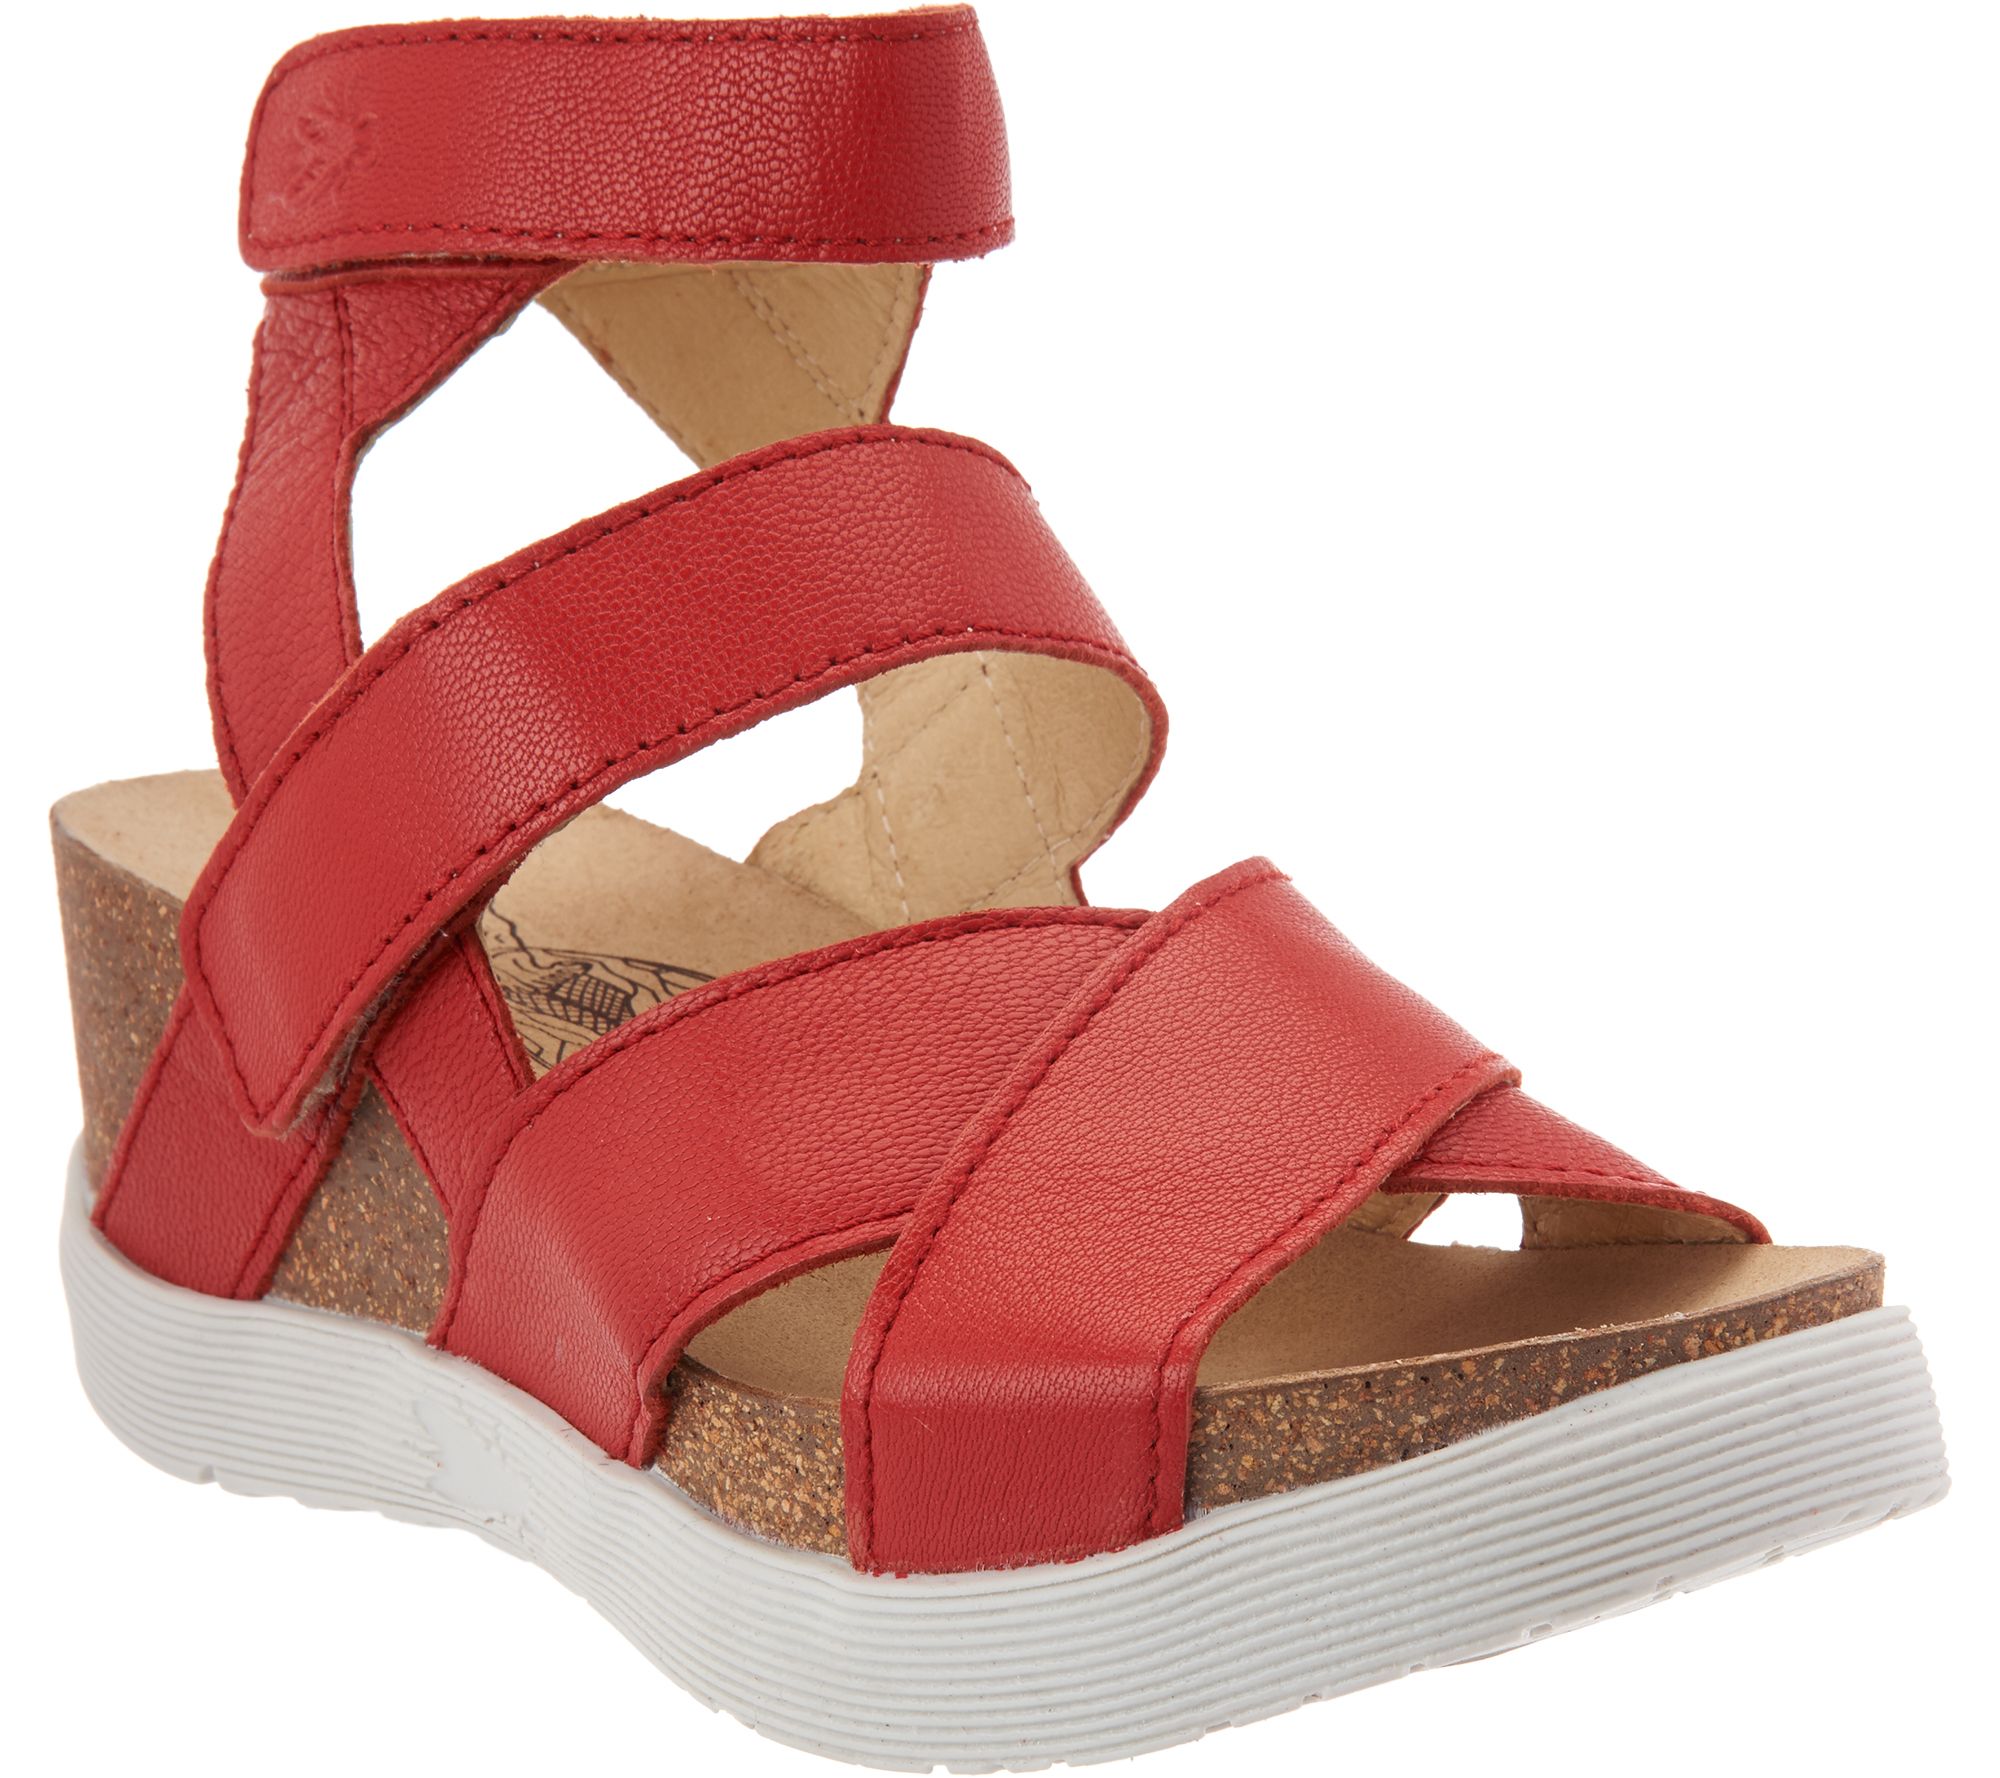 FLY London Leather Strappy Sandals - Wege - Page 1 — QVC.com